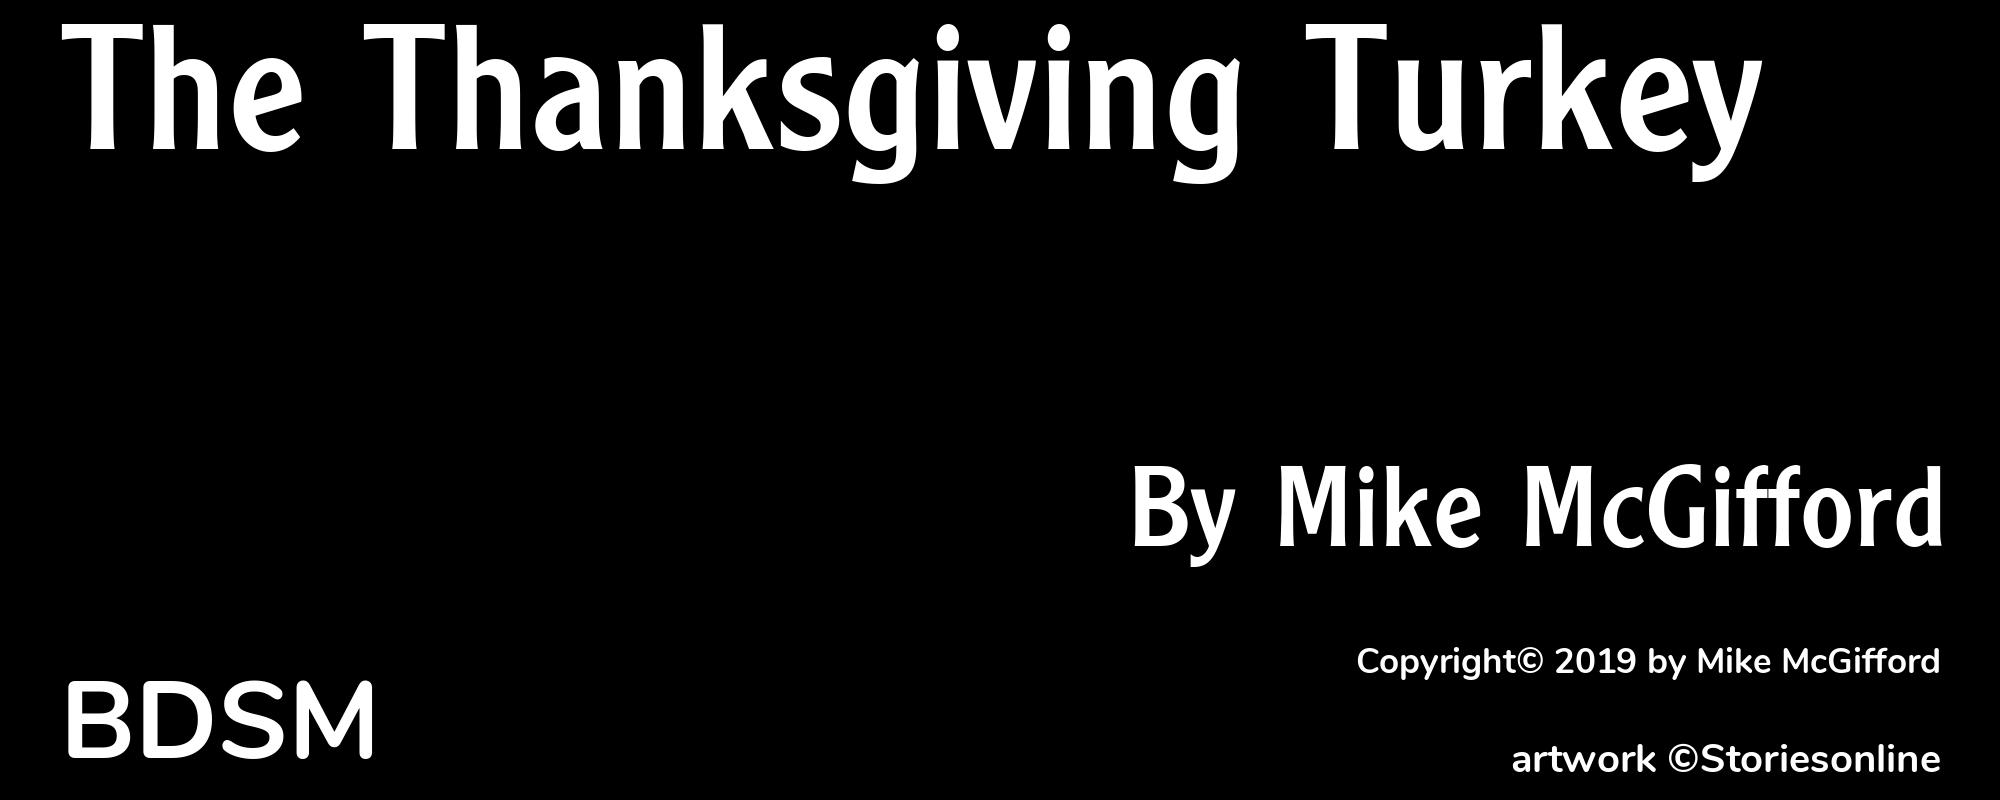 The Thanksgiving Turkey - Cover